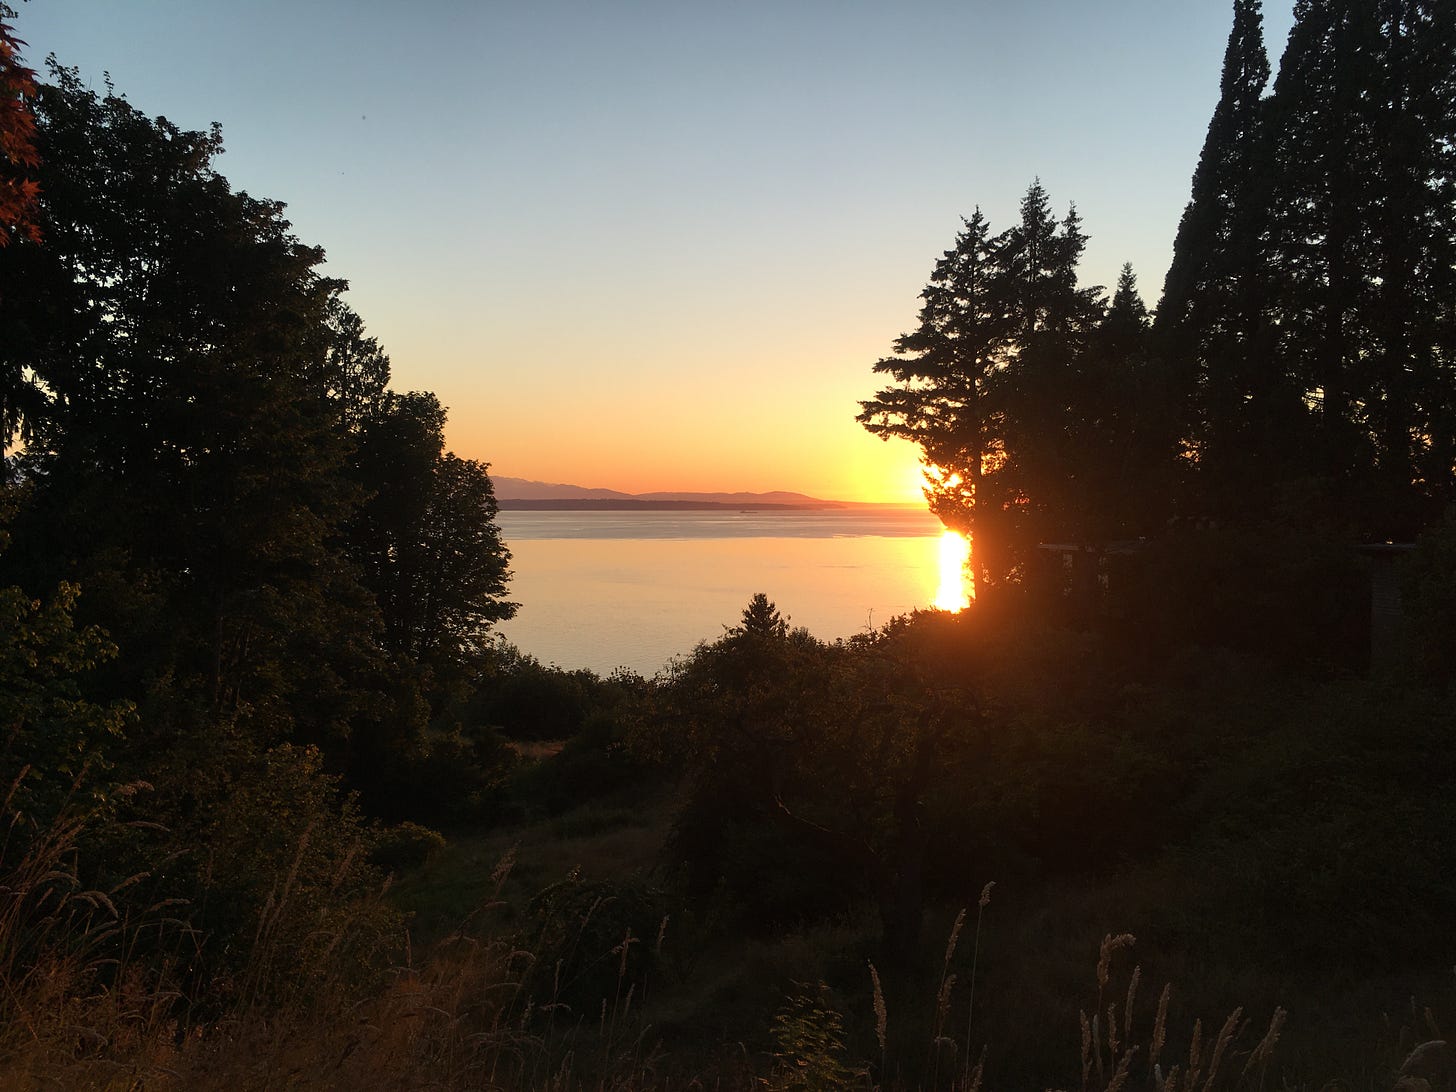 Sun setting at the Puget Sound. Sound waters and behind them, the slight Olympic Mountain Range, held by trees and a small valley. close to the camera are wisps of tall grass.